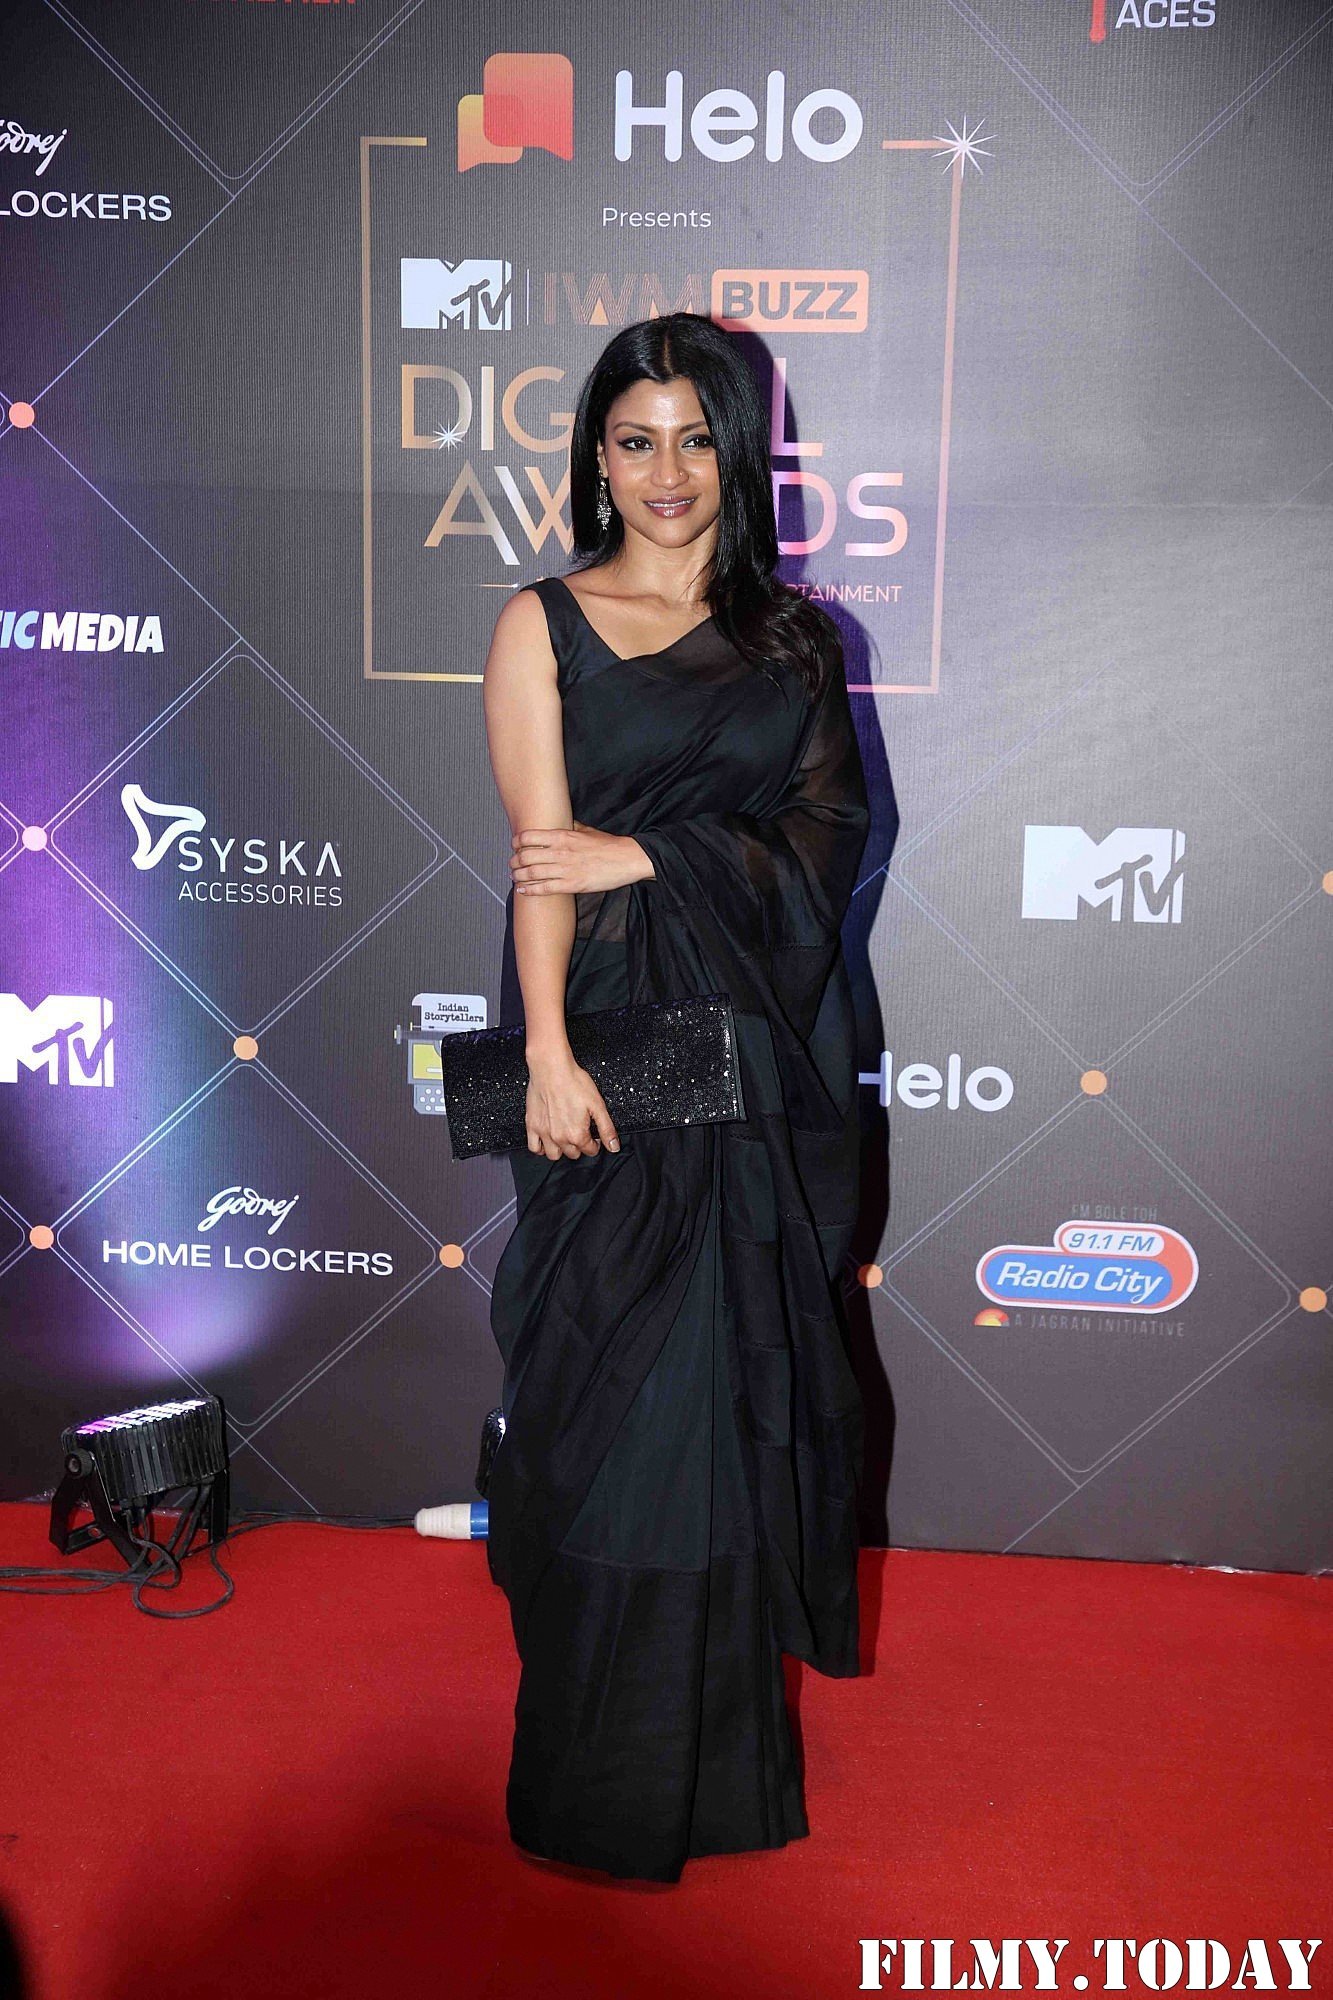 Konkona Sen Sharma - Photos: Red Carpet For The 2nd Edition Of MTV IWMBuzz Digital Awards | Picture 1698235